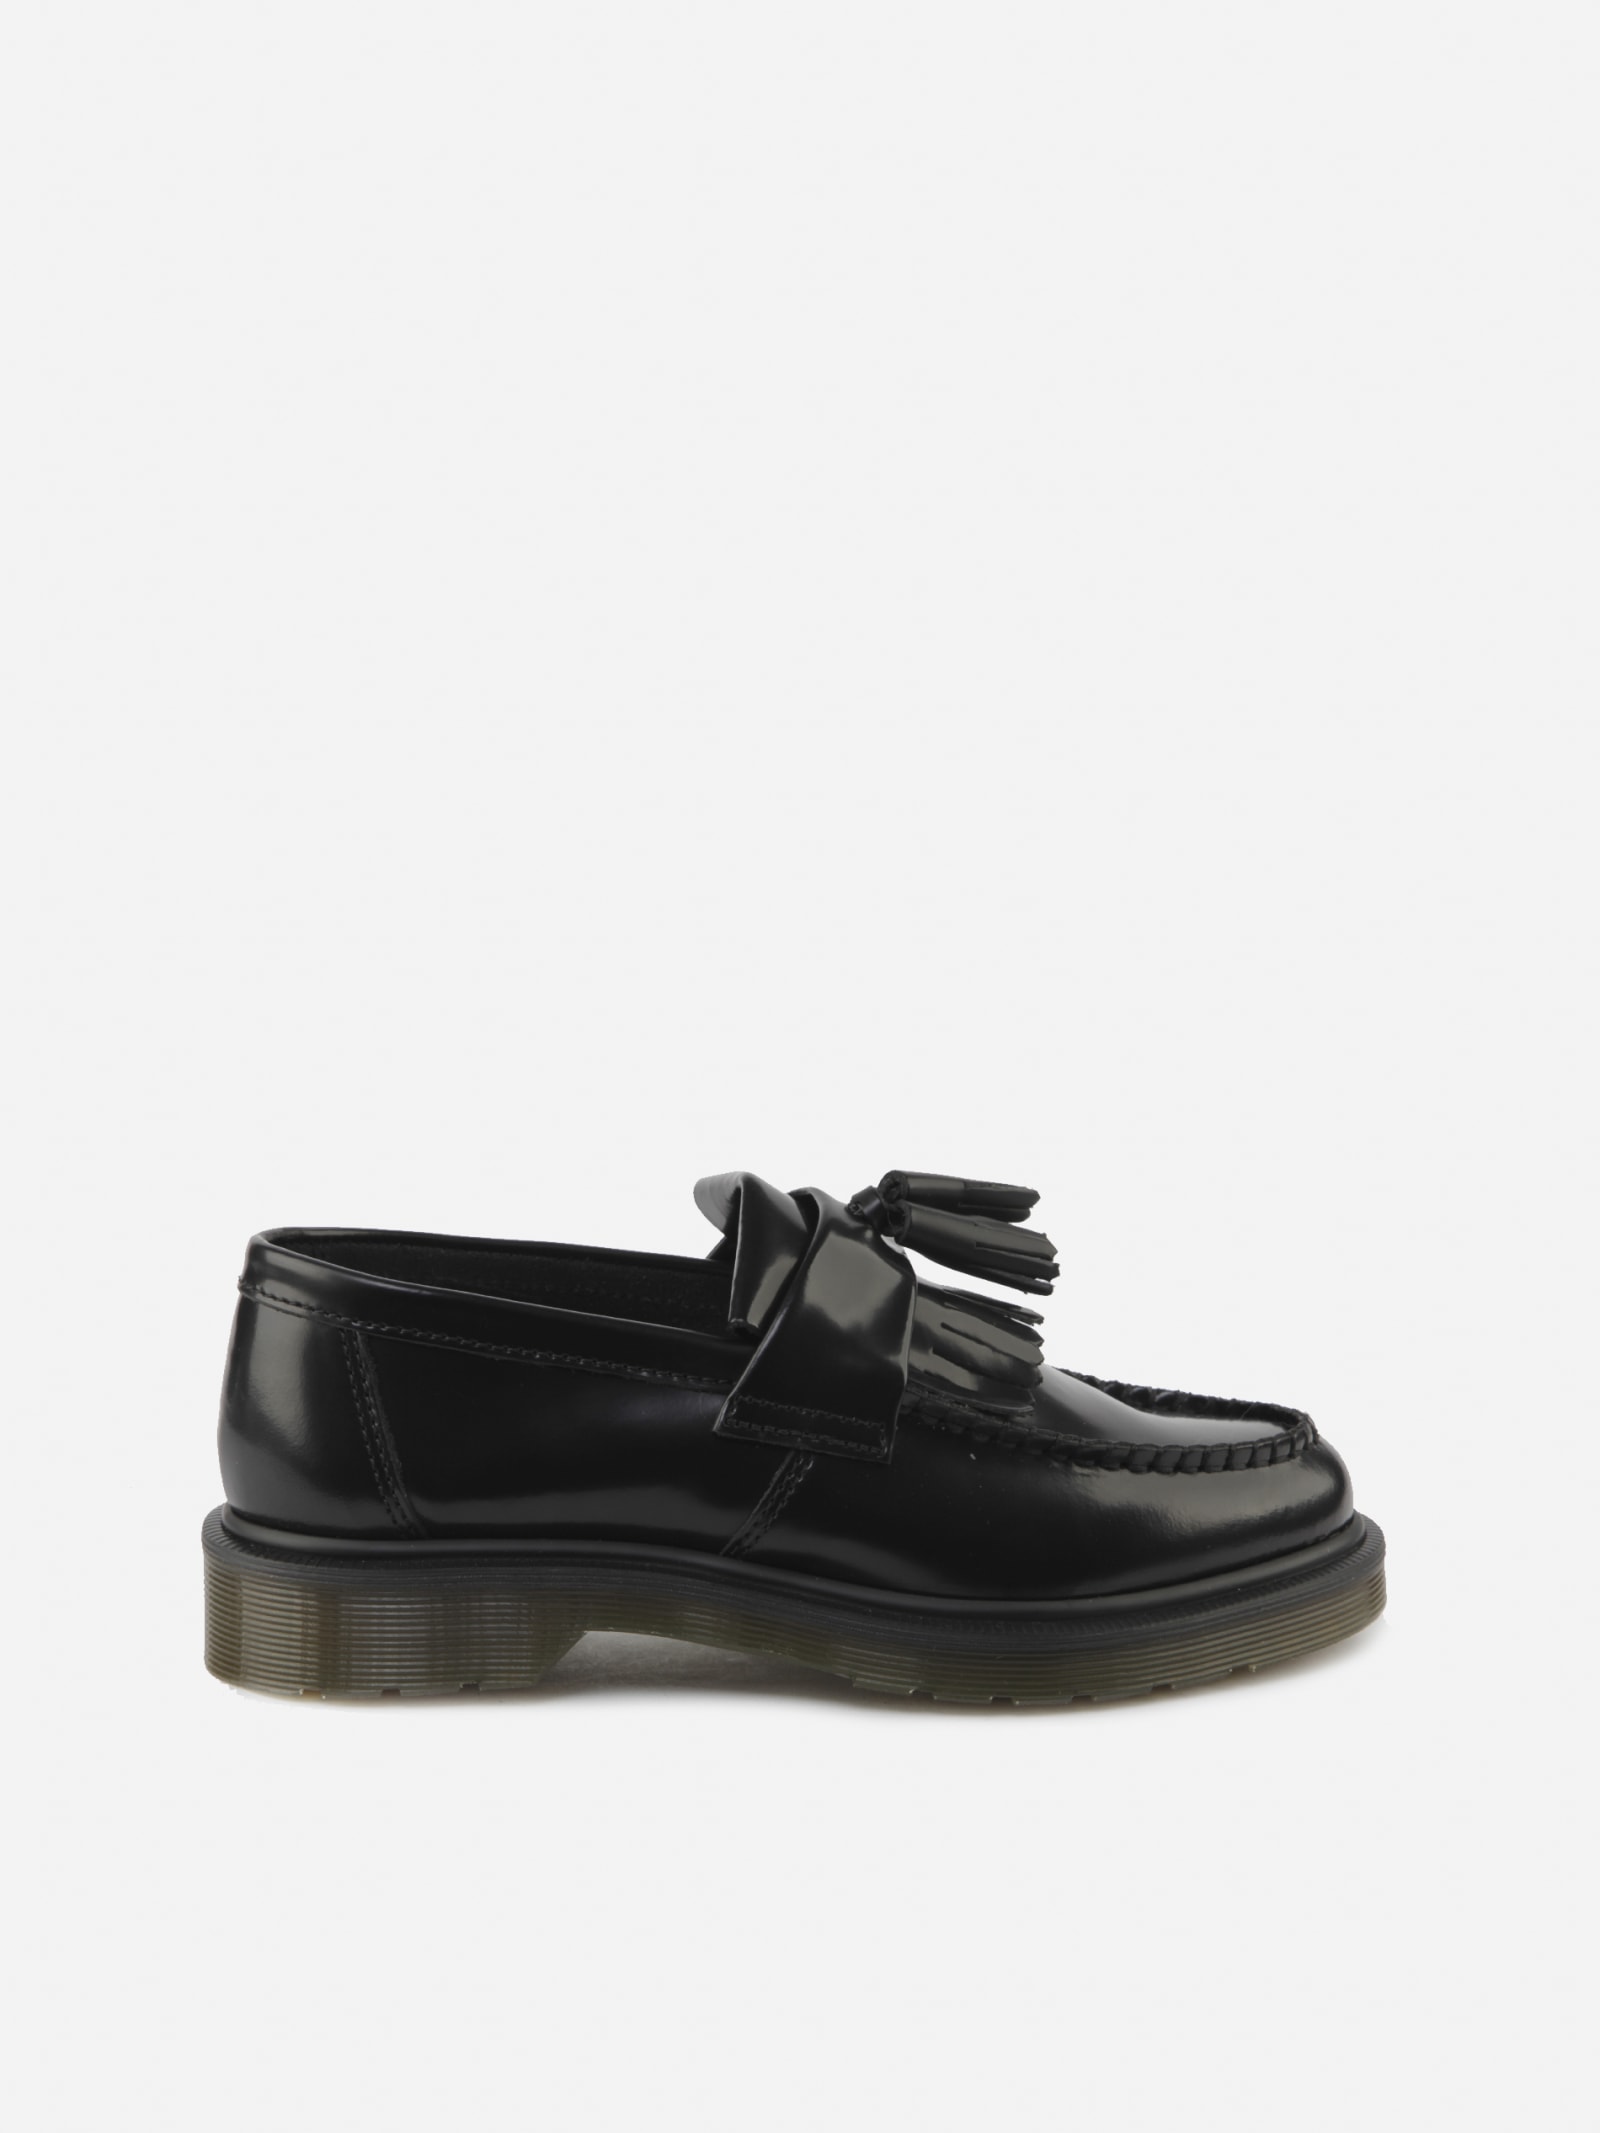 Buy Dr. Martens Adrian Moccasins In Shiny Leather online, shop Dr. Martens shoes with free shipping